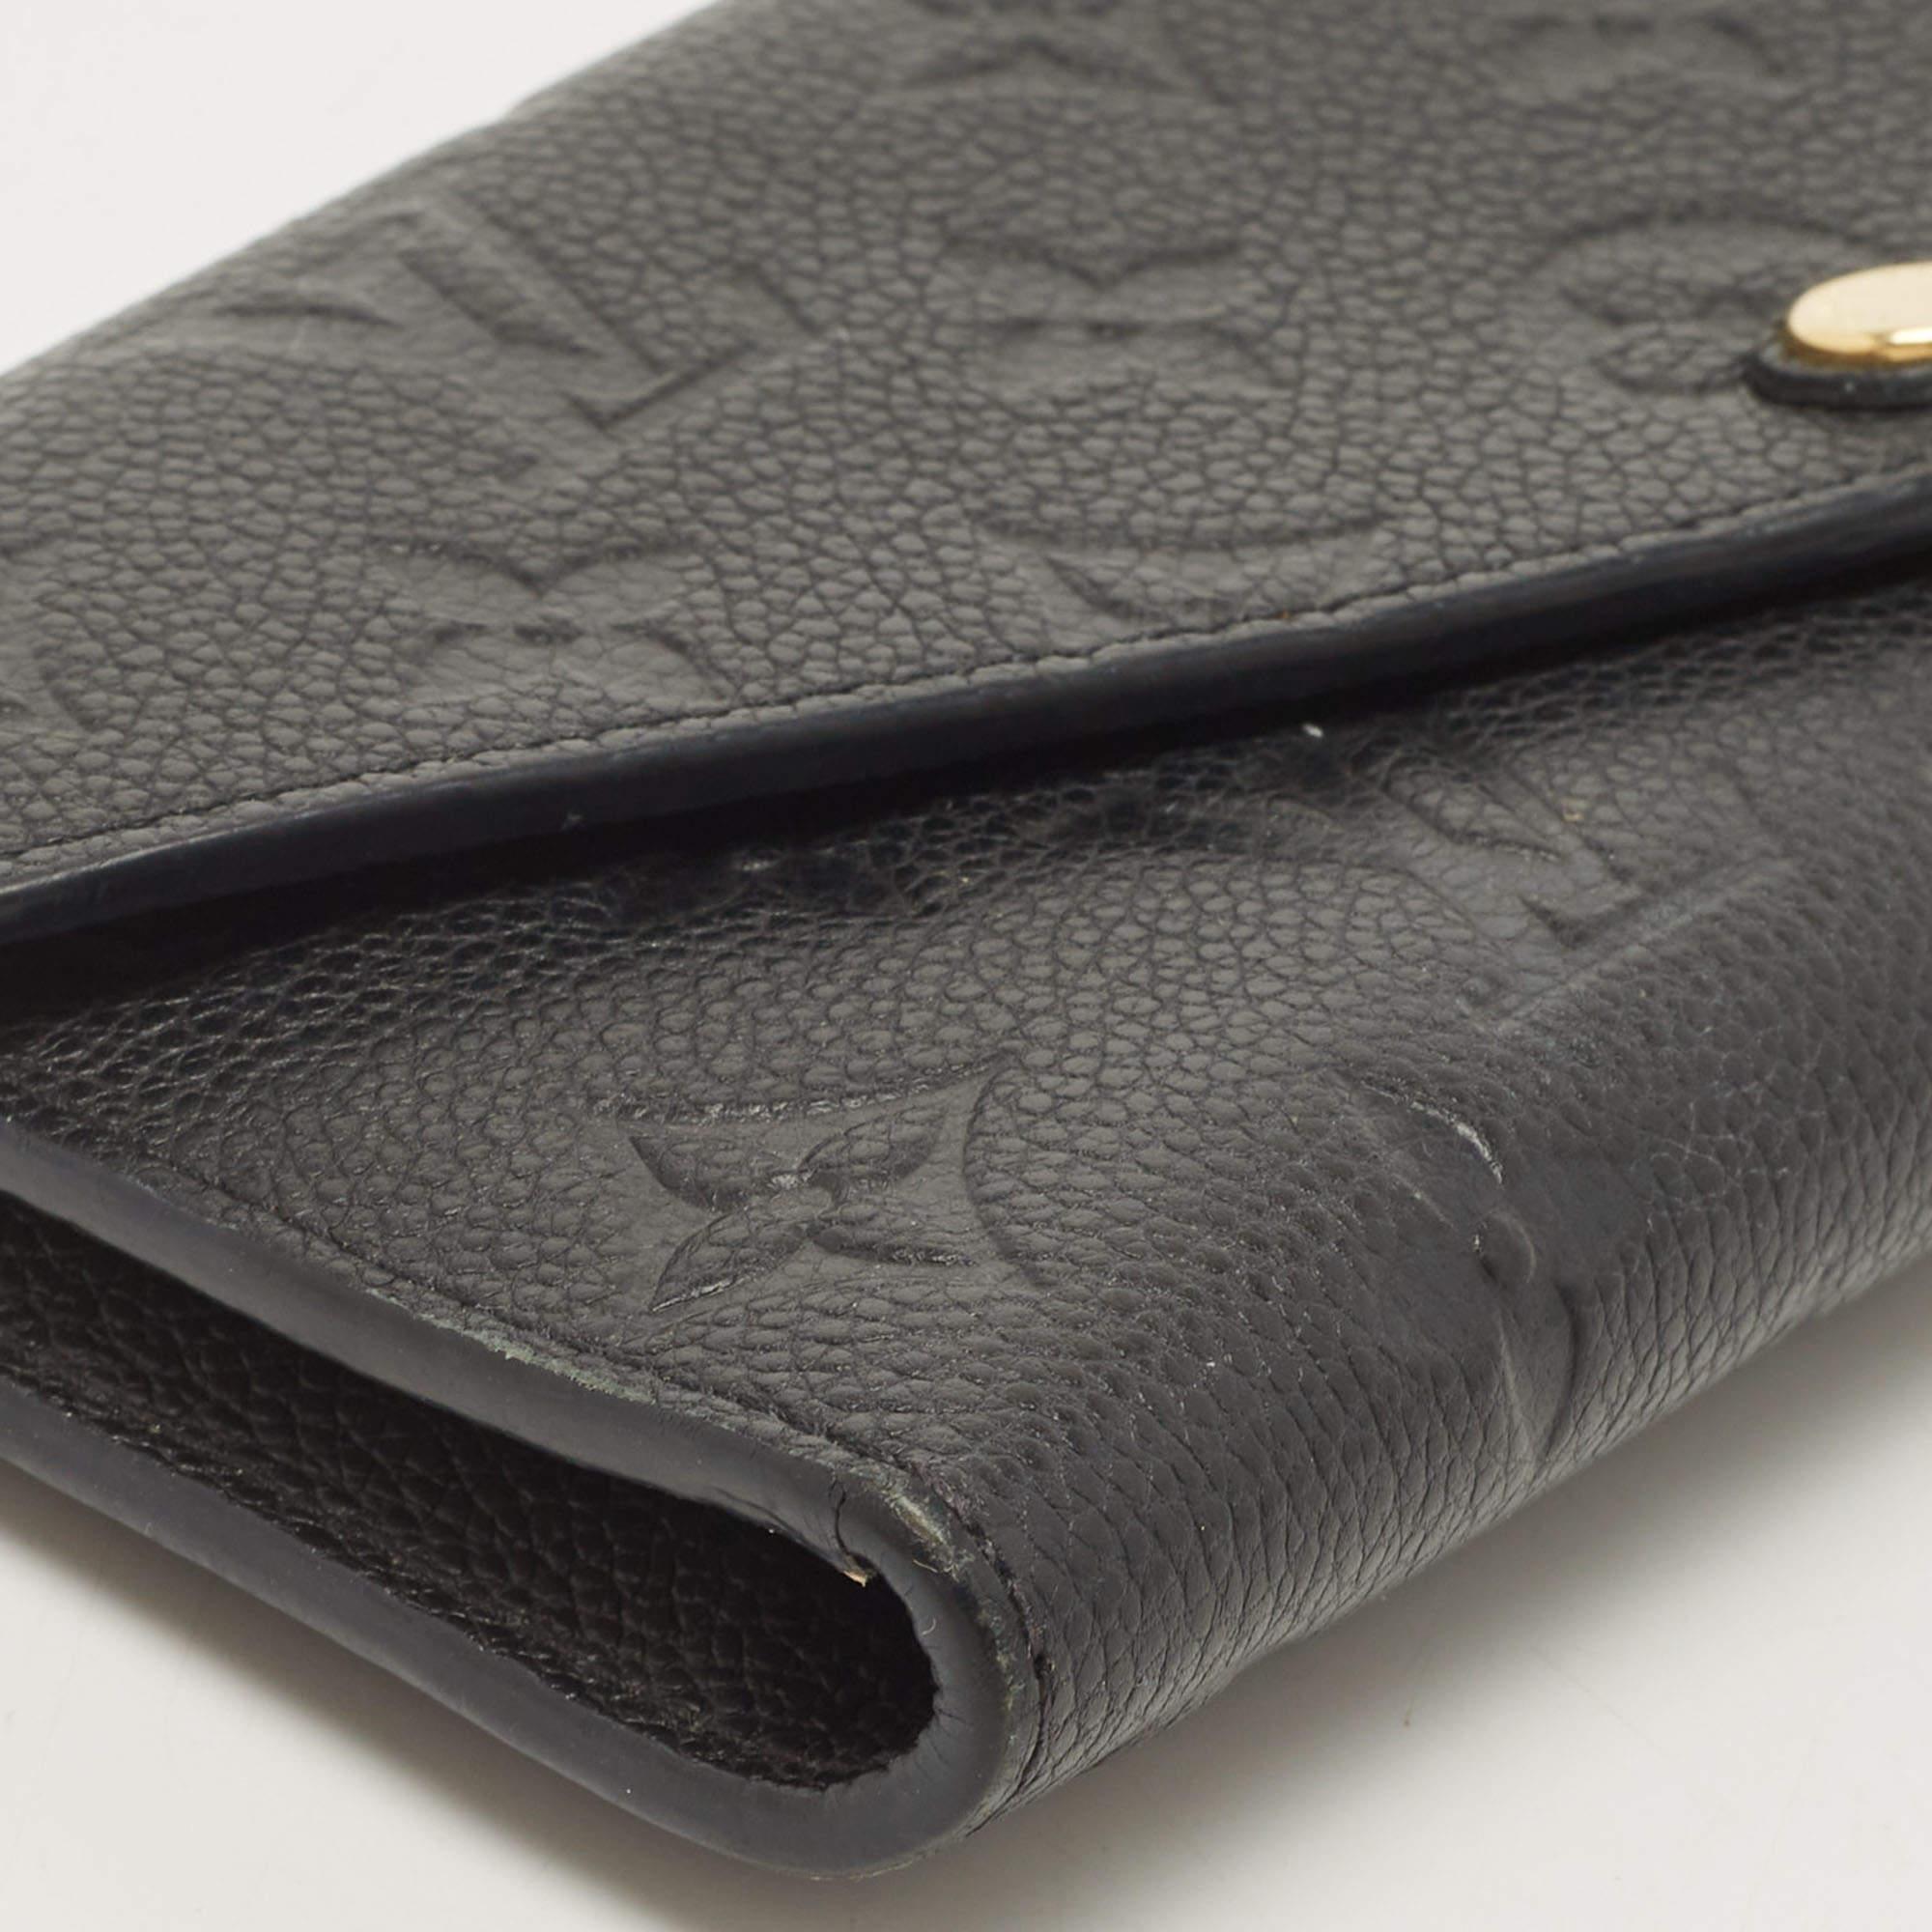 Created from Empreinte leather, the Josephine wallet by Louis Vuitton has a fine finish. The wallet features an envelope flap that opens to reveal multiple compartments within. This sophisticated piece will be a great addition to your daily style.

